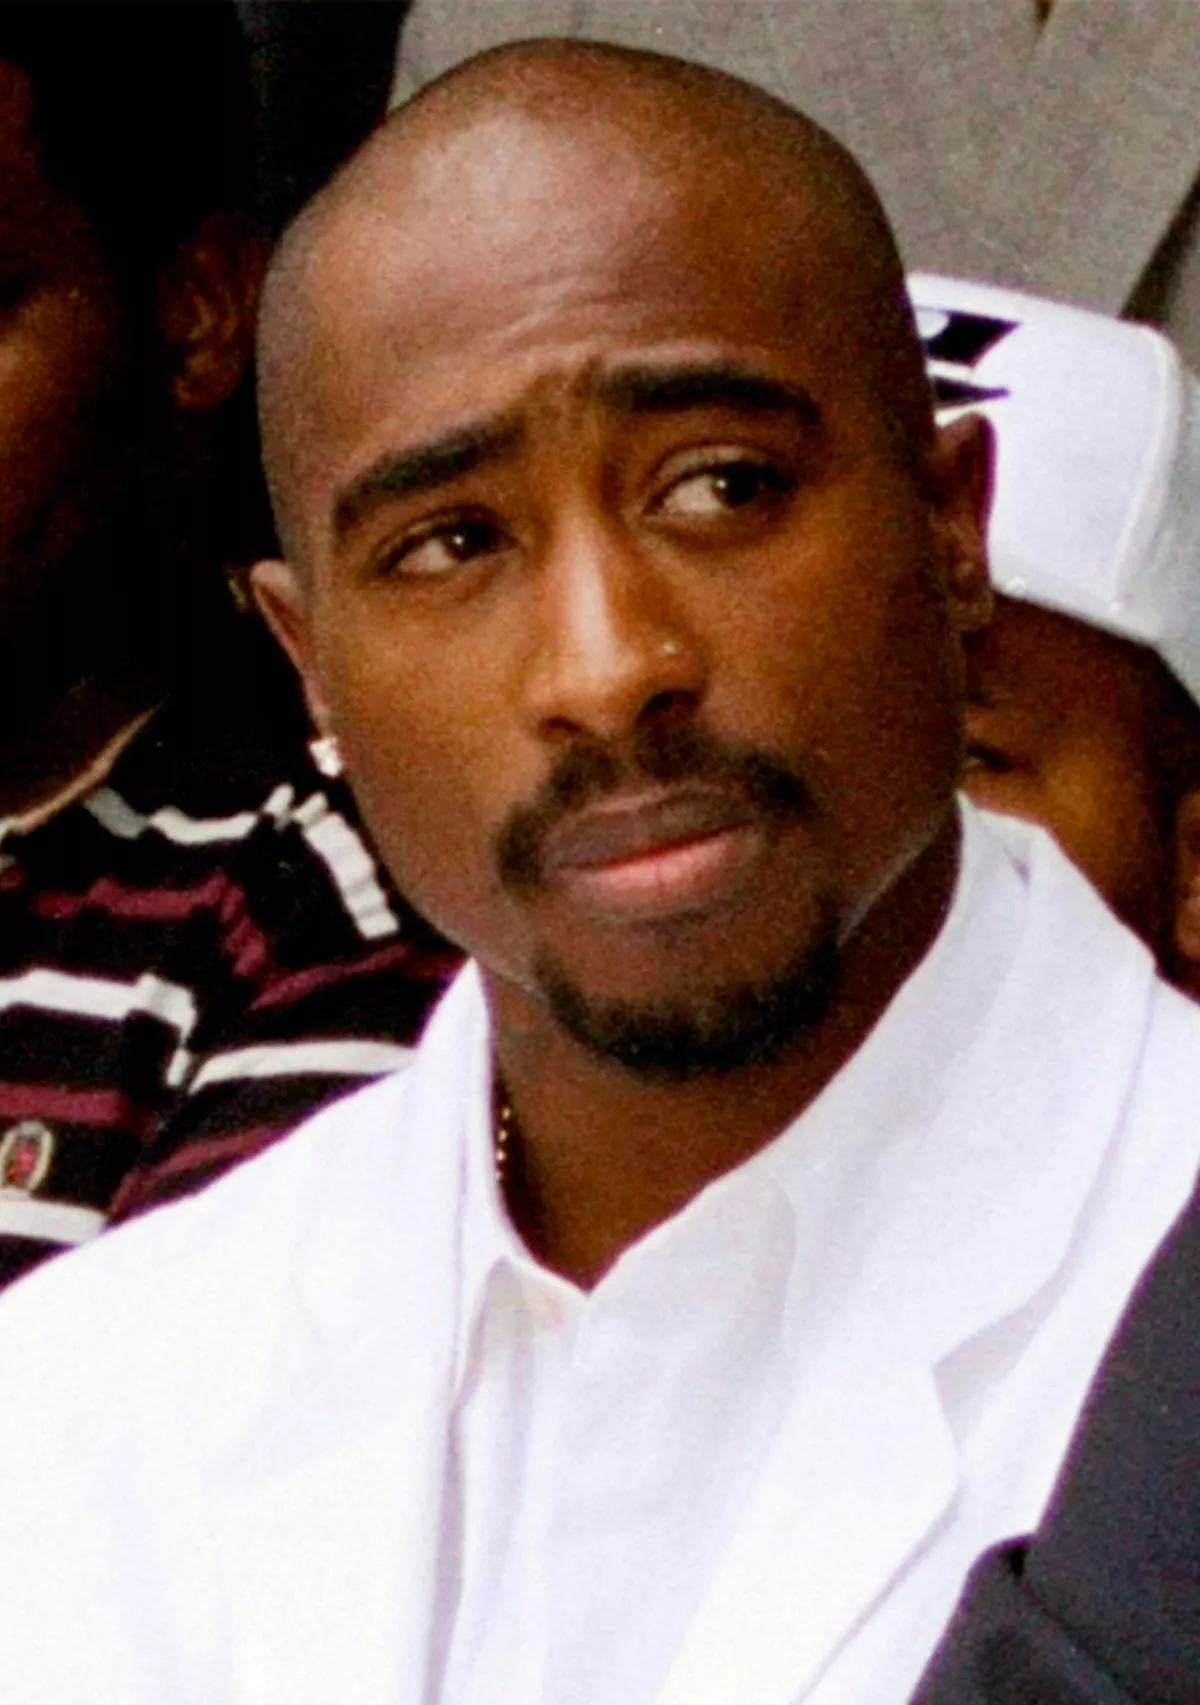 Tupac Shakurs last words exposed as he lay bleeding after fatal shooting 1